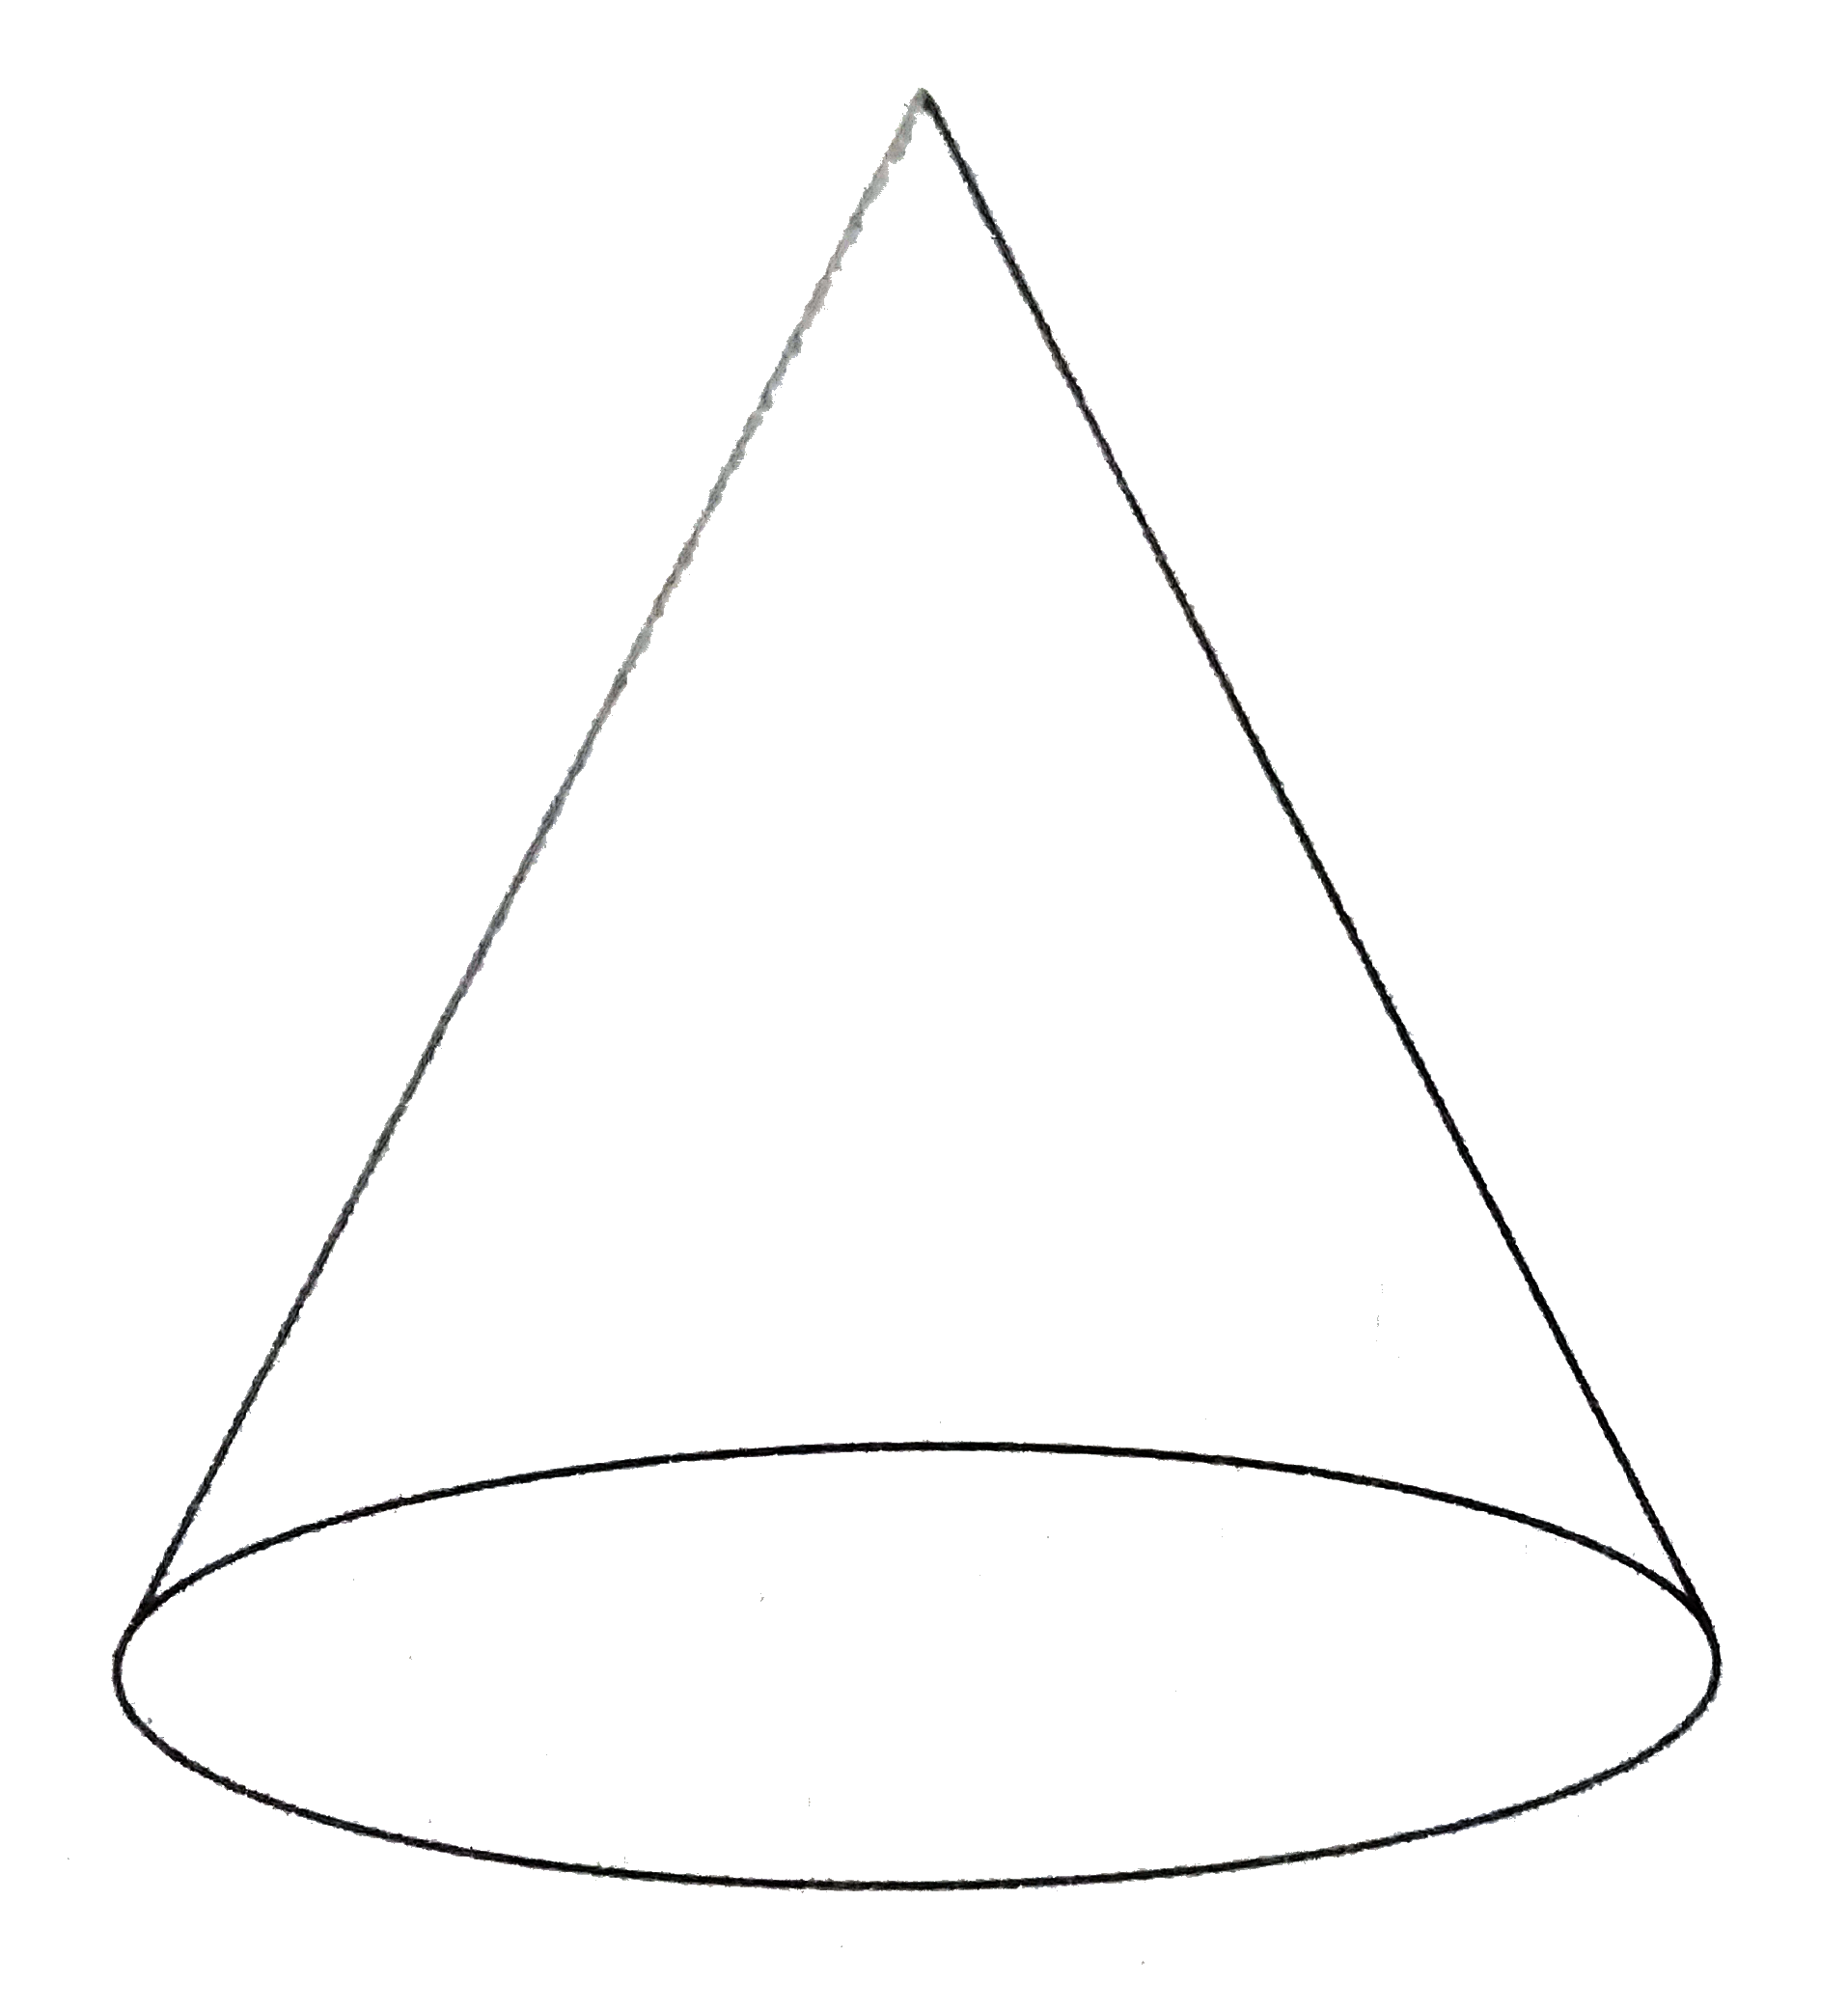 The lateral area of the right circular cone is 60pi. If the radius of the base is 6, what is the volume of the cone